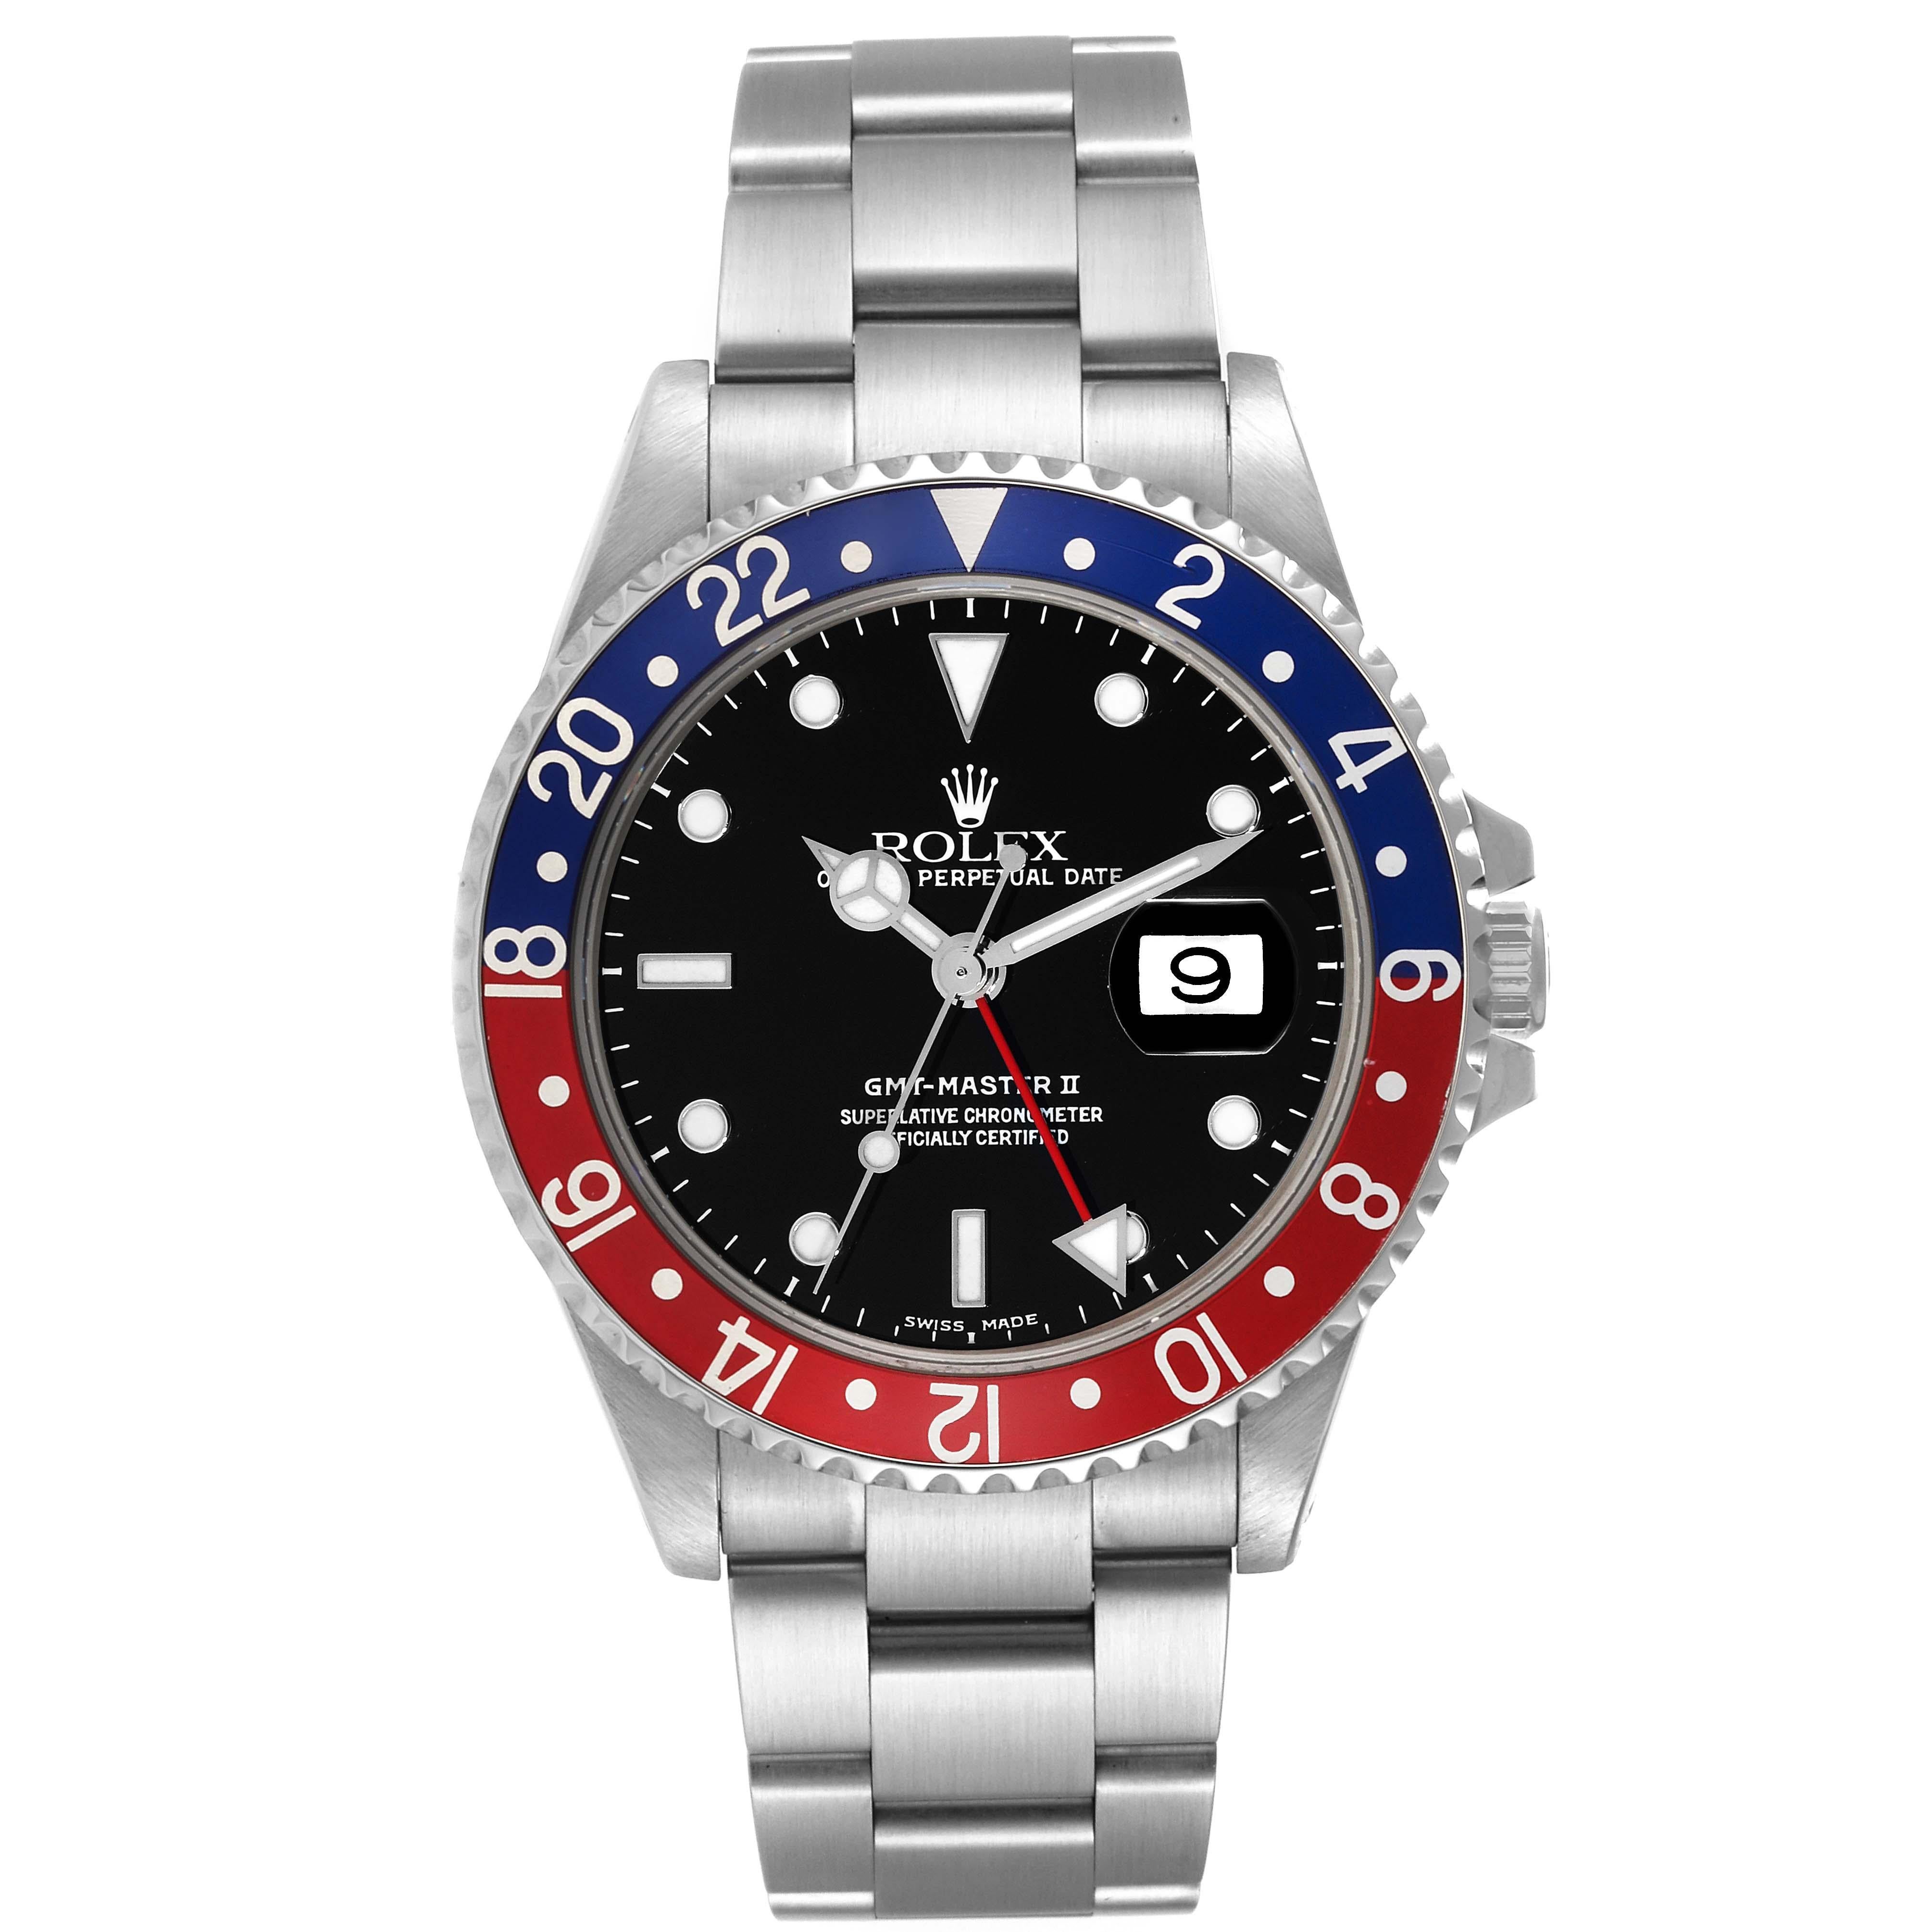 Rolex GMT Master II Blue Red Pepsi Bezel Steel Mens Watch 16710 Box Papers. Officially certified chronometer automatic self-winding movement. Stainless steel case 40.0 mm in diameter. Rolex logo on the crown. Bidirectional rotating GMT bezel with a